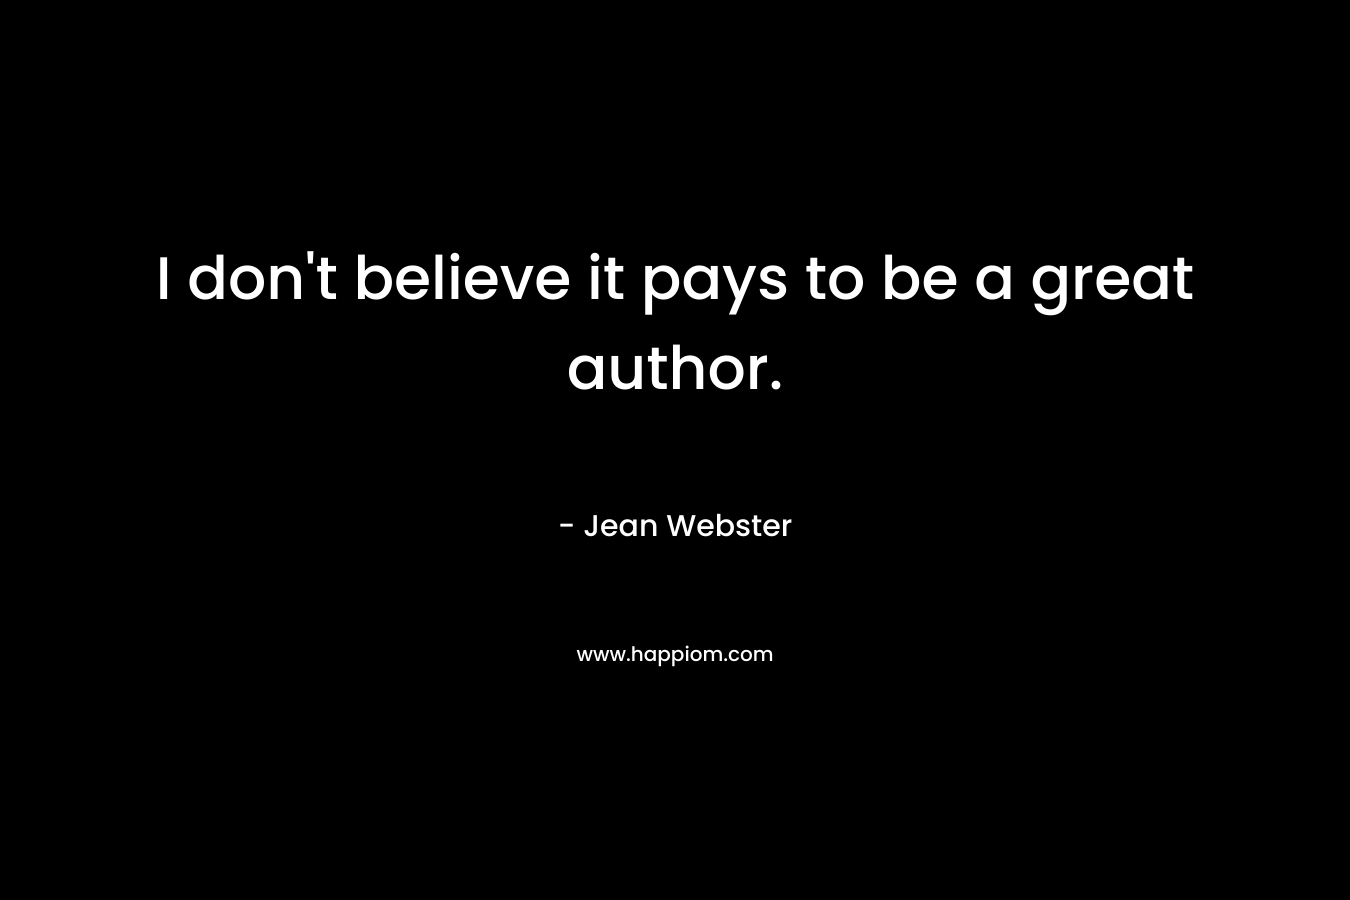 I don’t believe it pays to be a great author. – Jean Webster